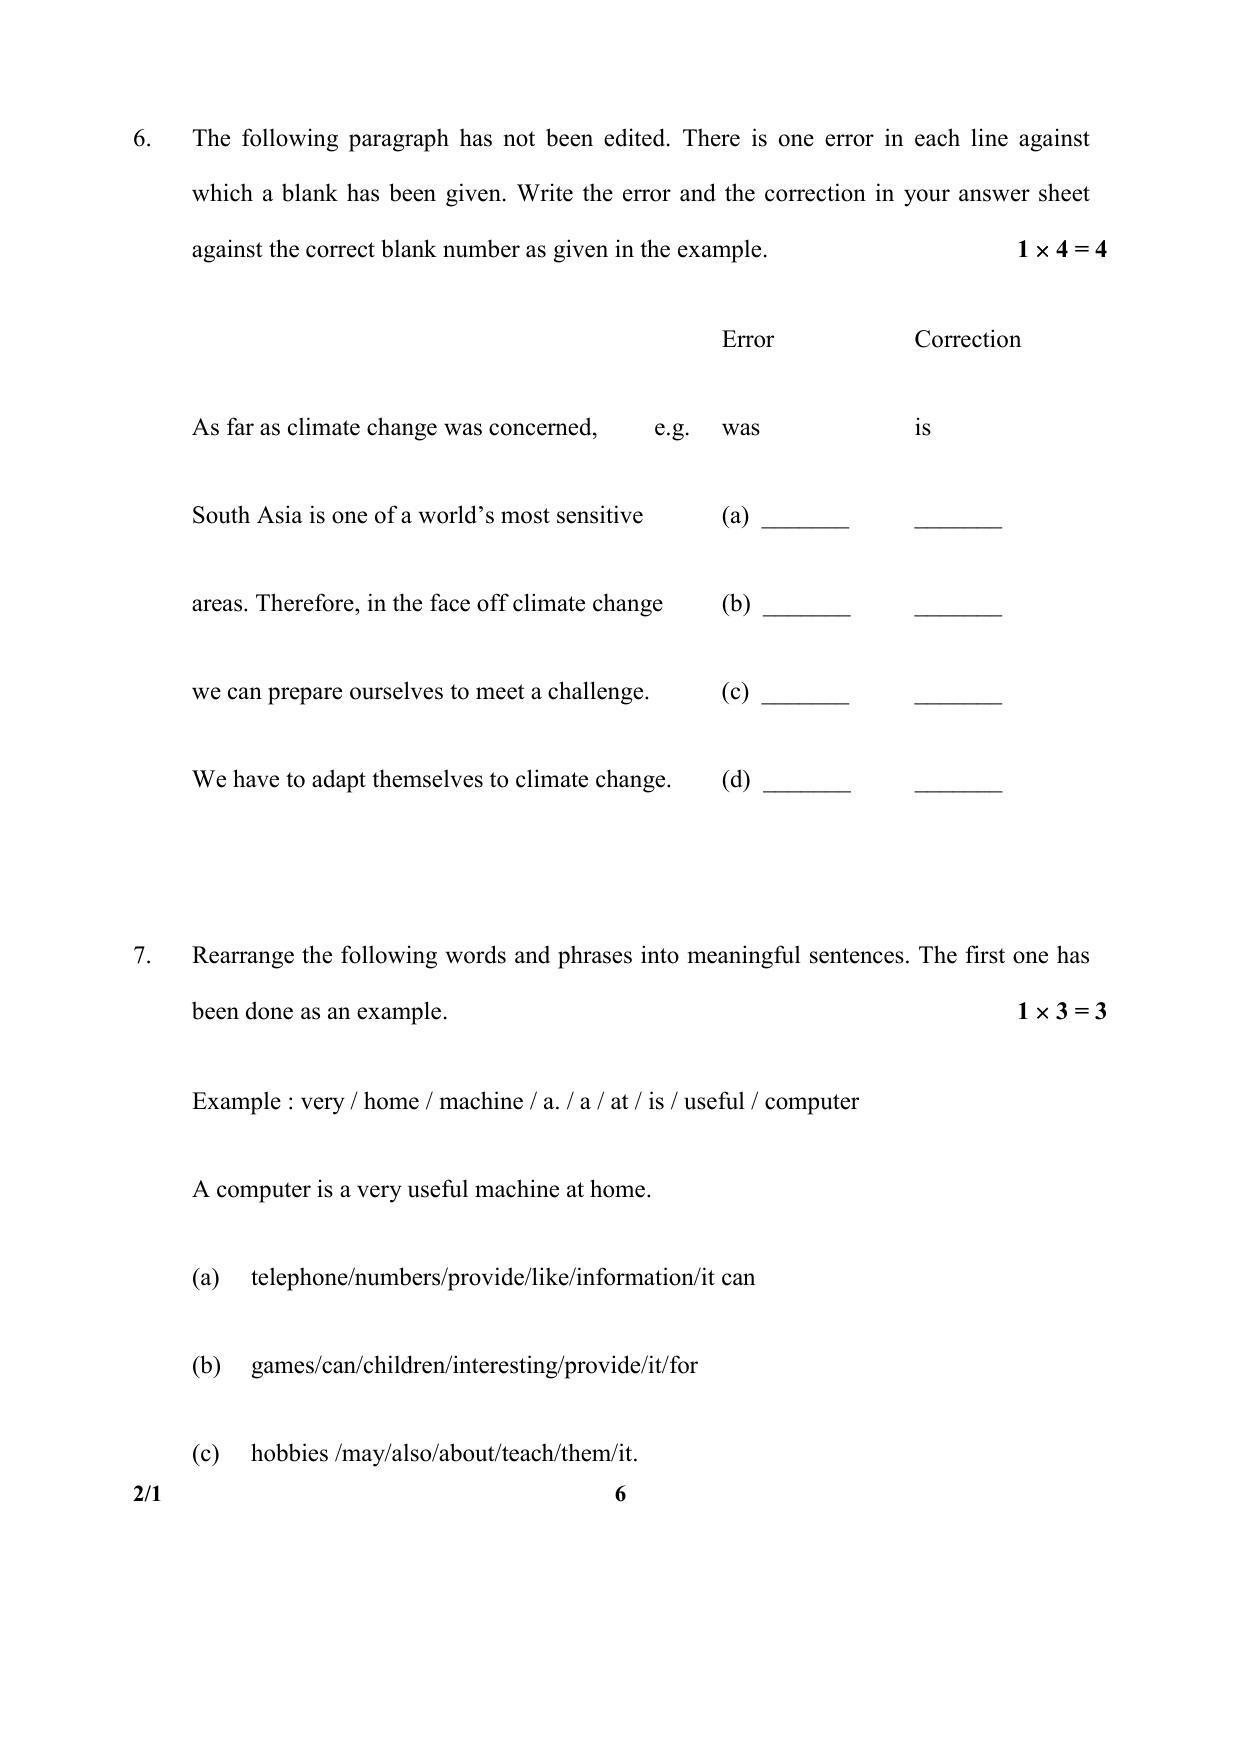 CBSE Class 10 2-1 English (Language And Literature) 2017-comptt Question Paper - Page 6